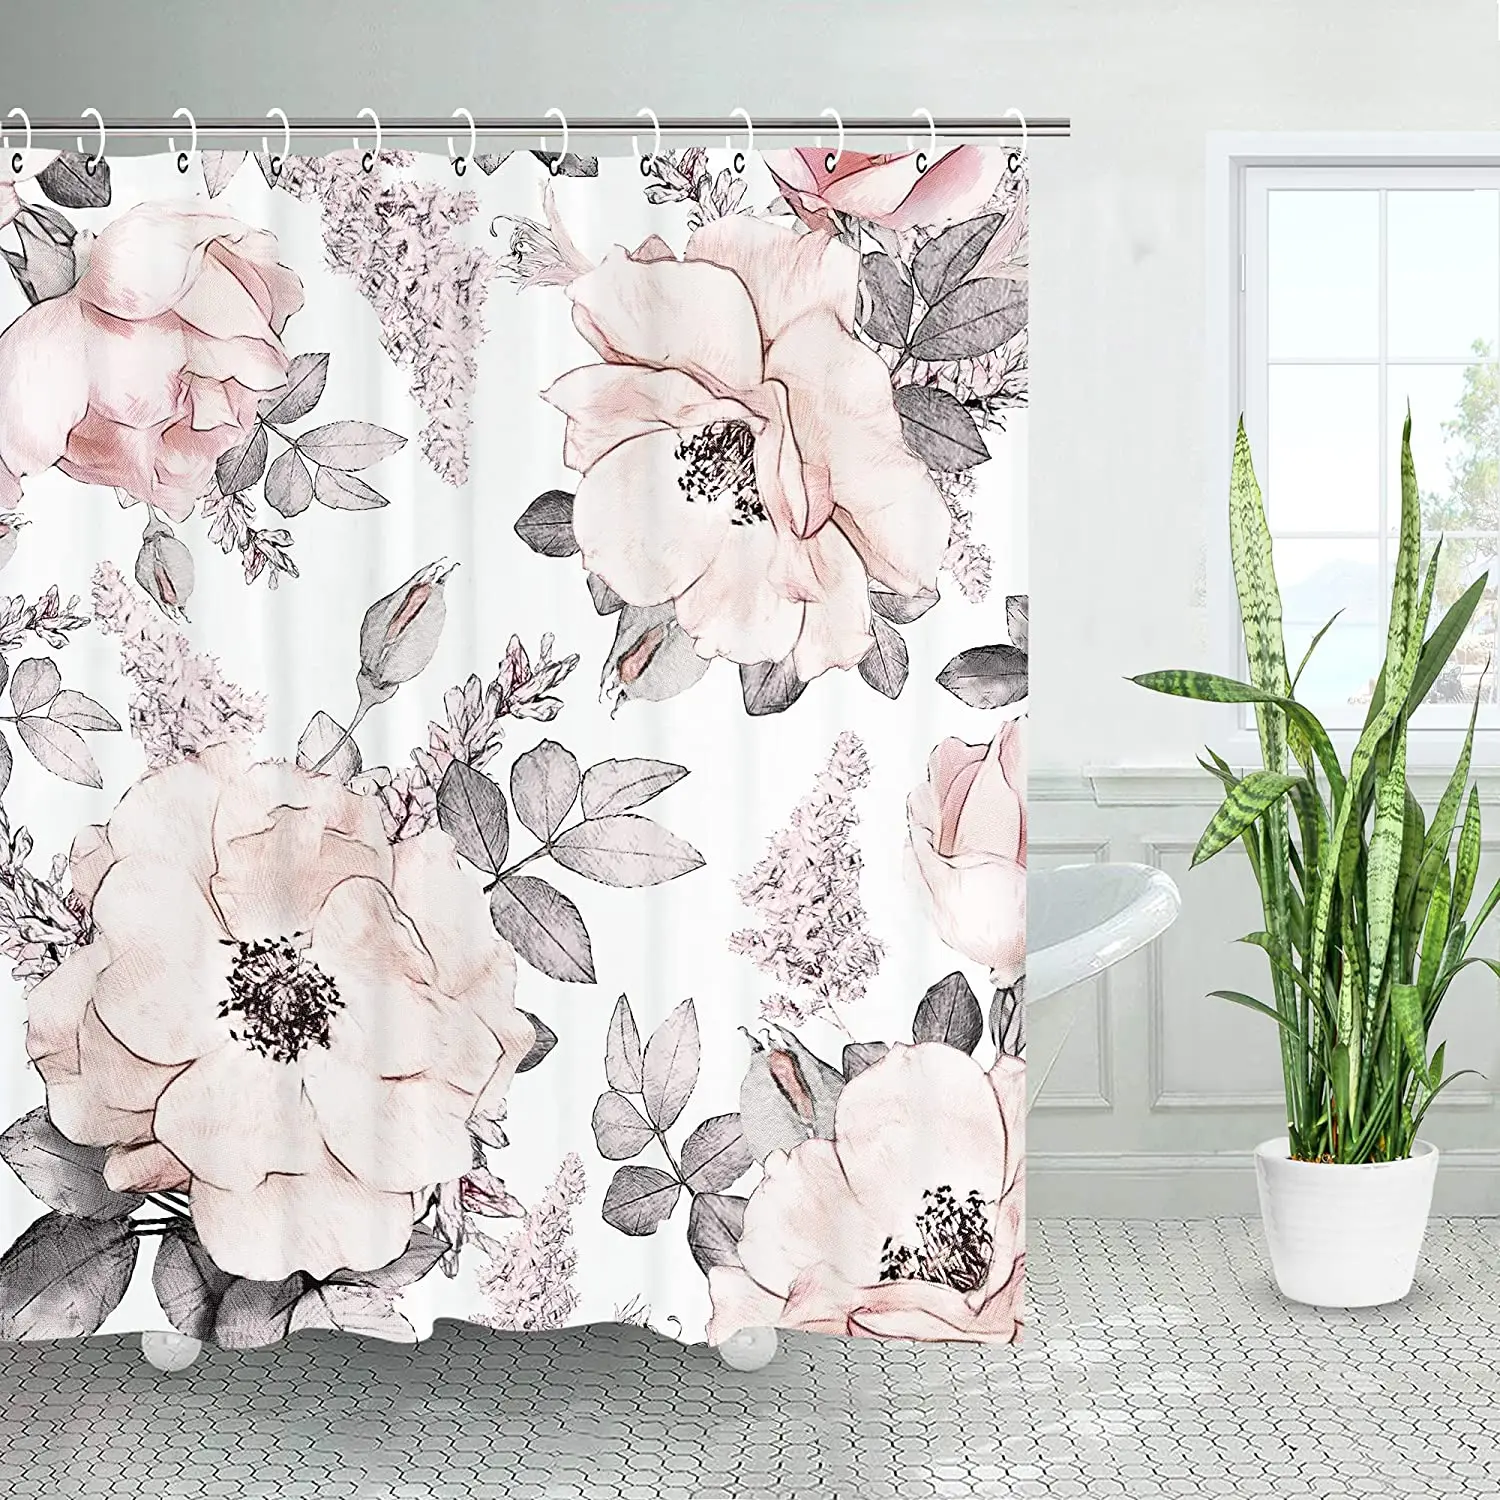 

Watercolor Floral Shower Curtain Abstract Flowers Fabric Bath Curtains with Hooks Pink Blossom Gray Bathroom Decor 72x72 Inches